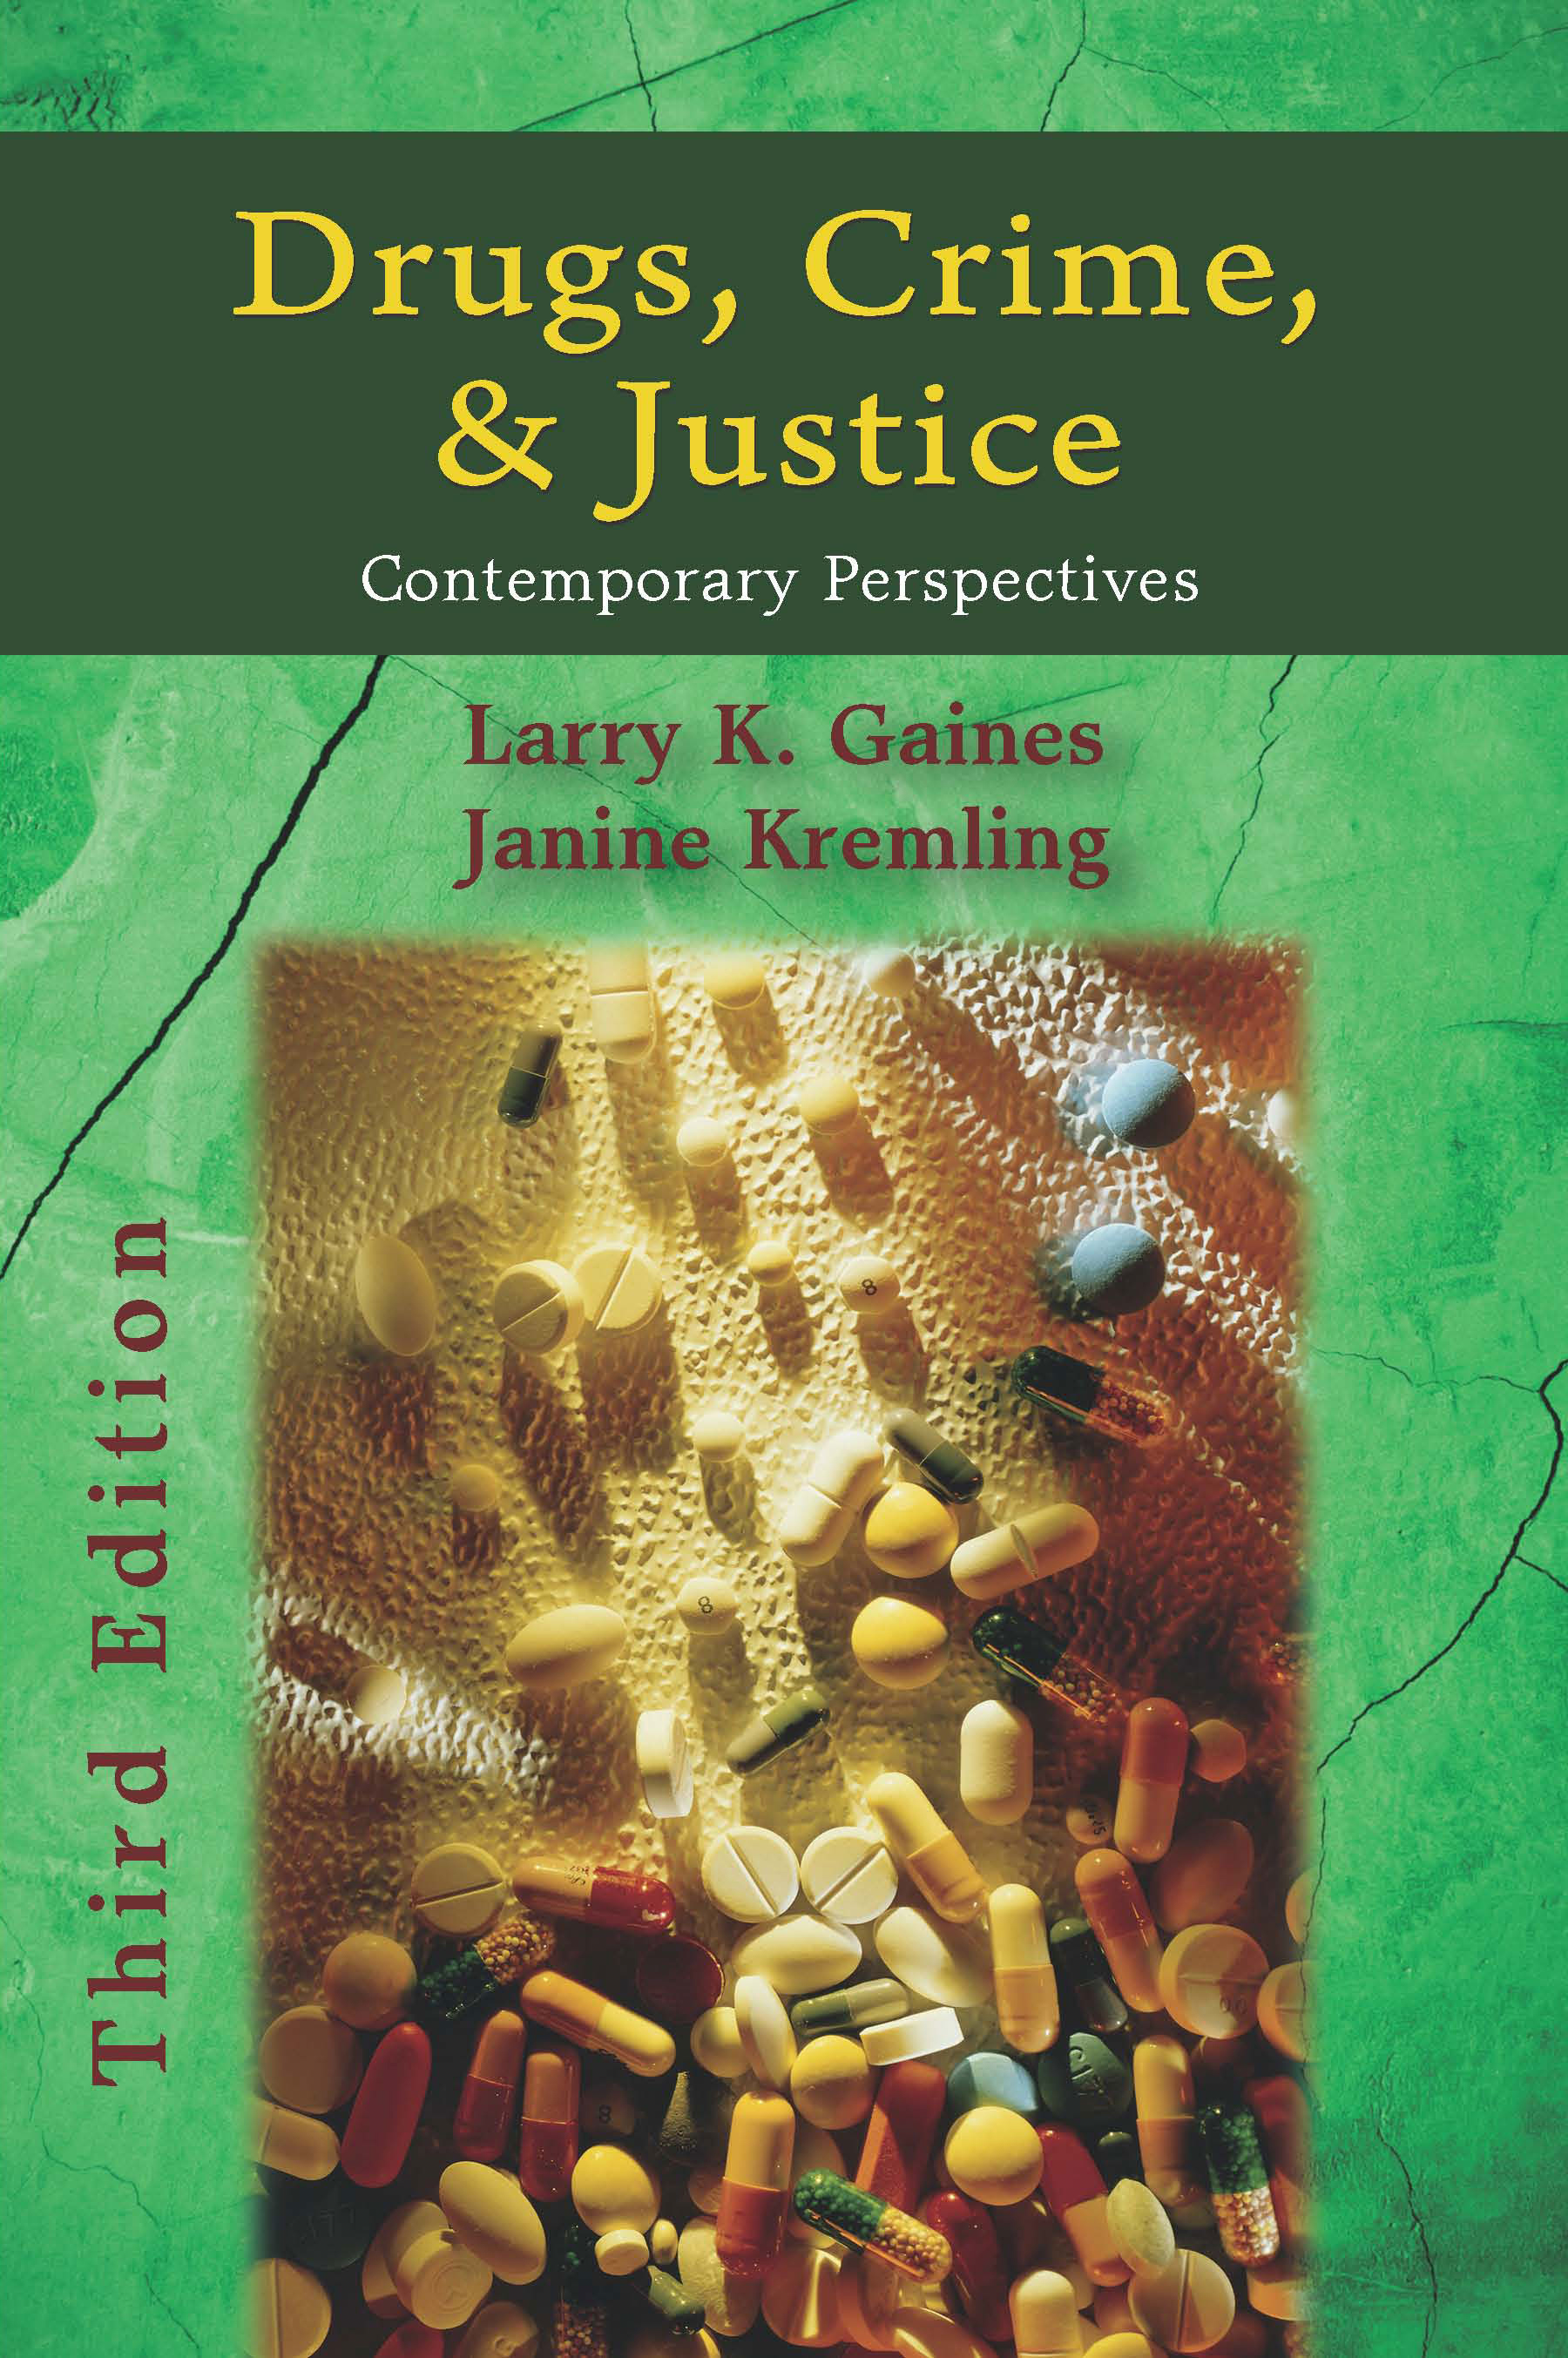 Drugs, Crime, and Justice: Contemporary Perspectives by Larry  Gaines, Janine  Kremling